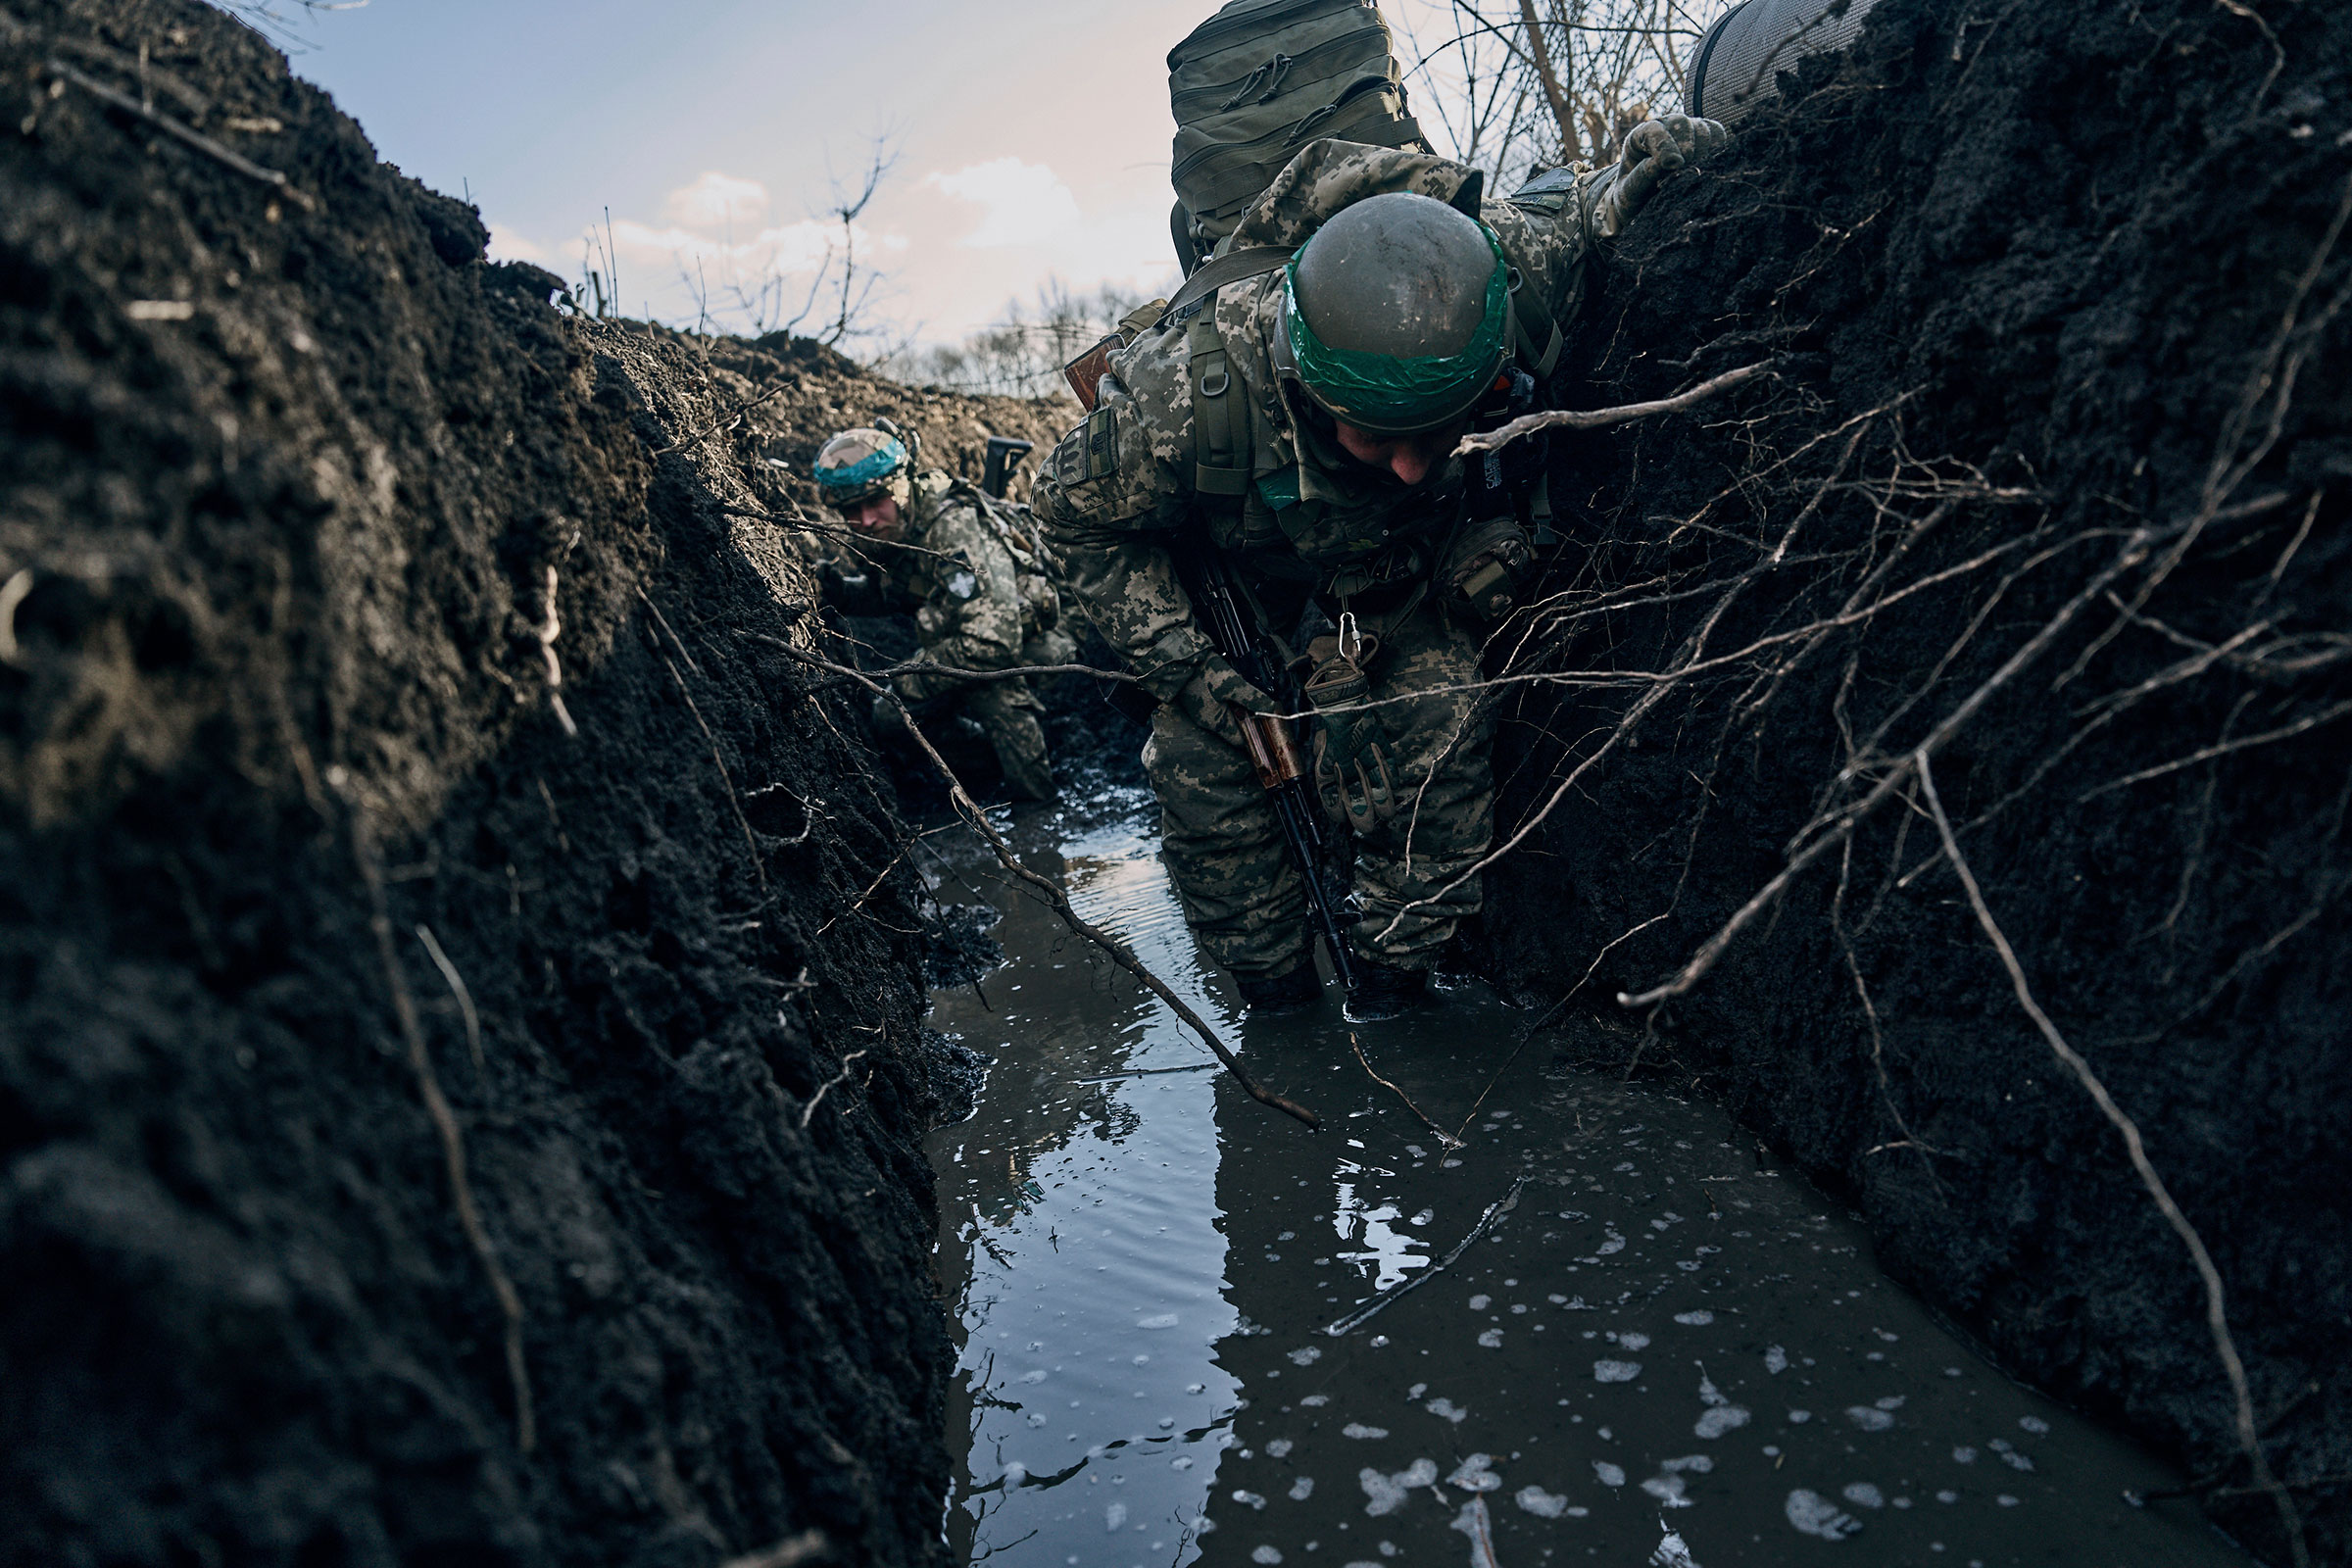 Ukrainian soldiers in a trench under Russian shelling on the frontline close to Bakhmut, on March 5, 2023. (Libkos—AP)